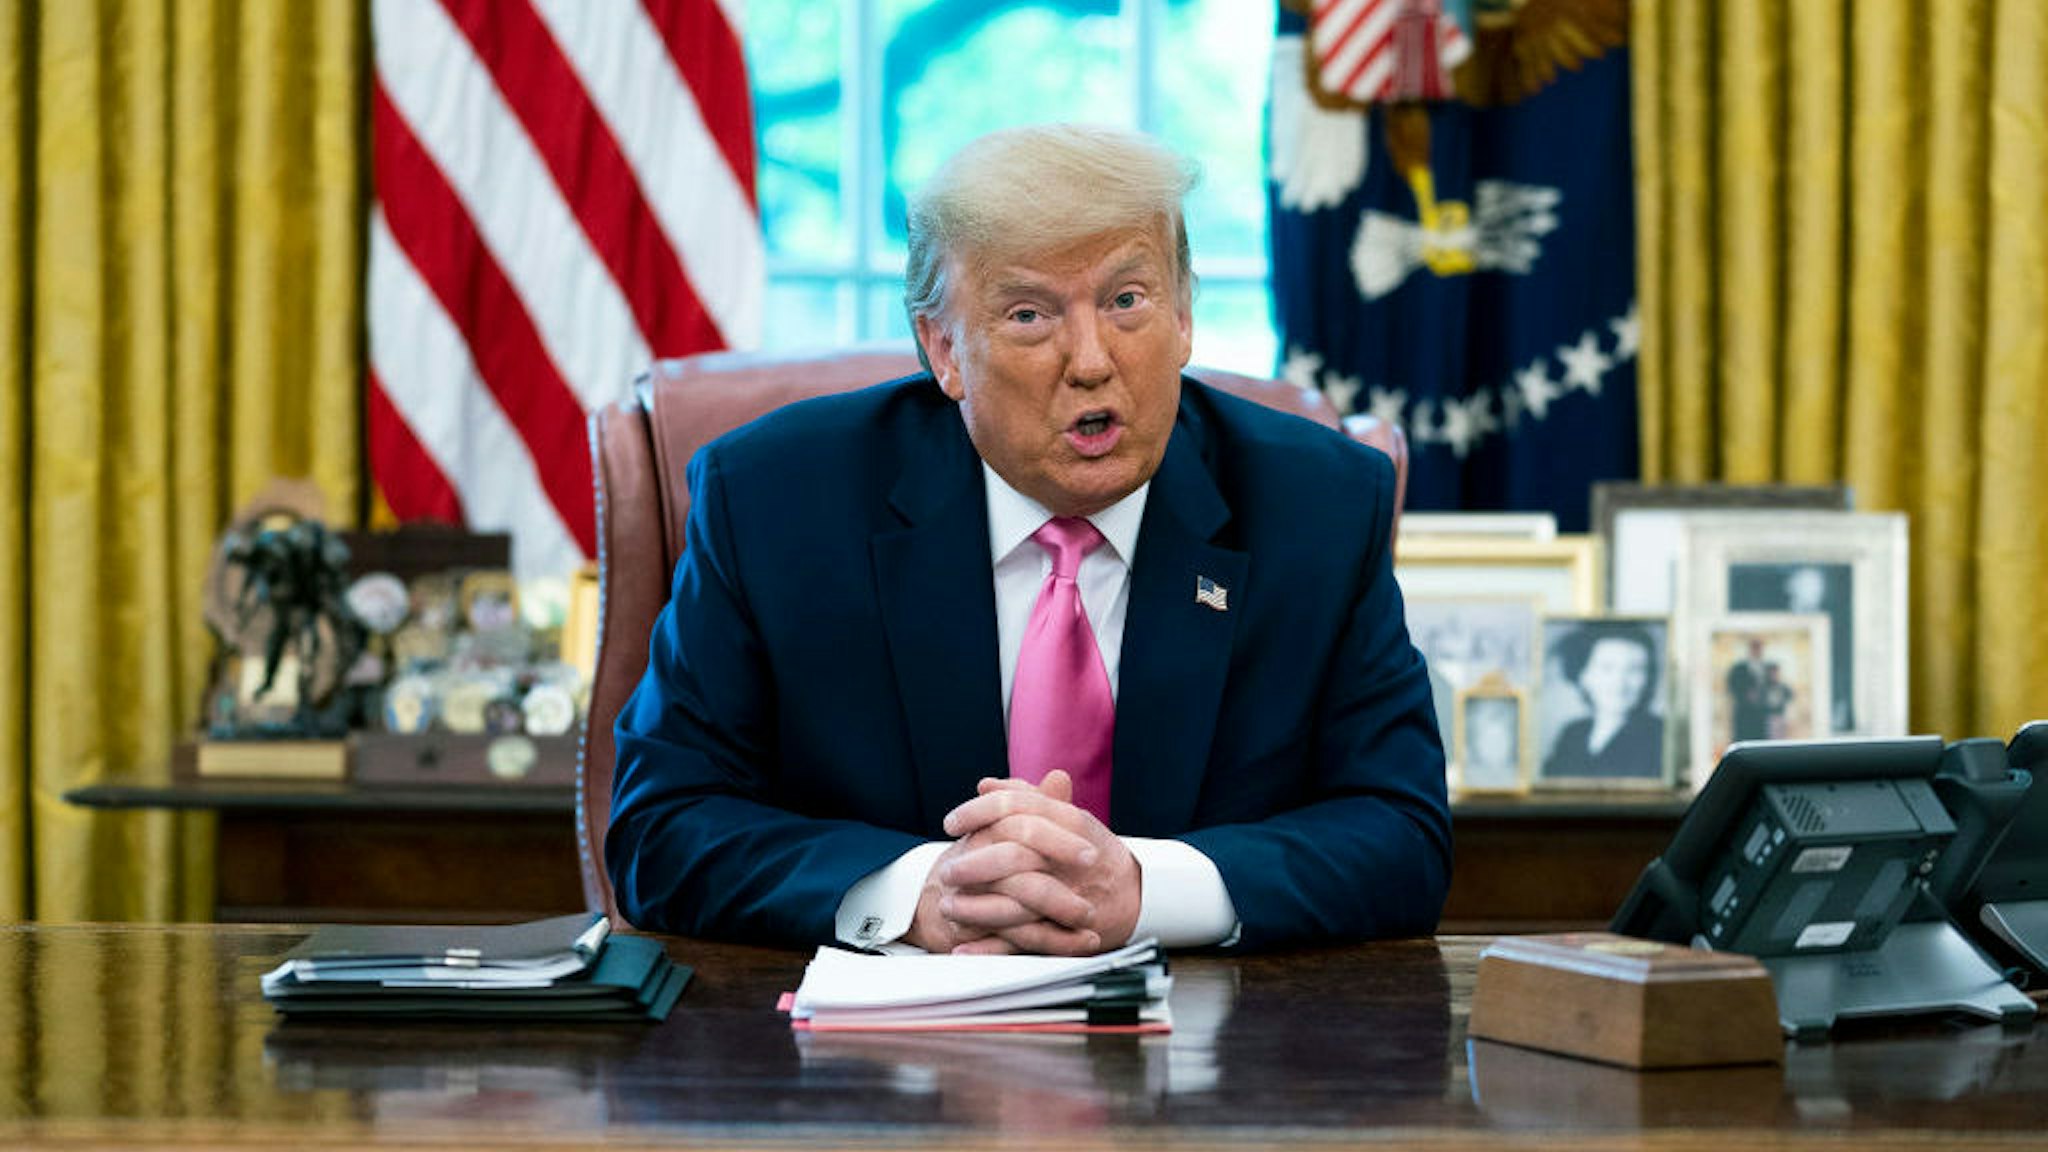 NYTUNREST - President Donald Trump makes remarks and he meets with GOP members of Congress and members of his cabinet in the Oval Office, Monday, July 20, 2020. ( Photo by Doug Mills/The New York Times)